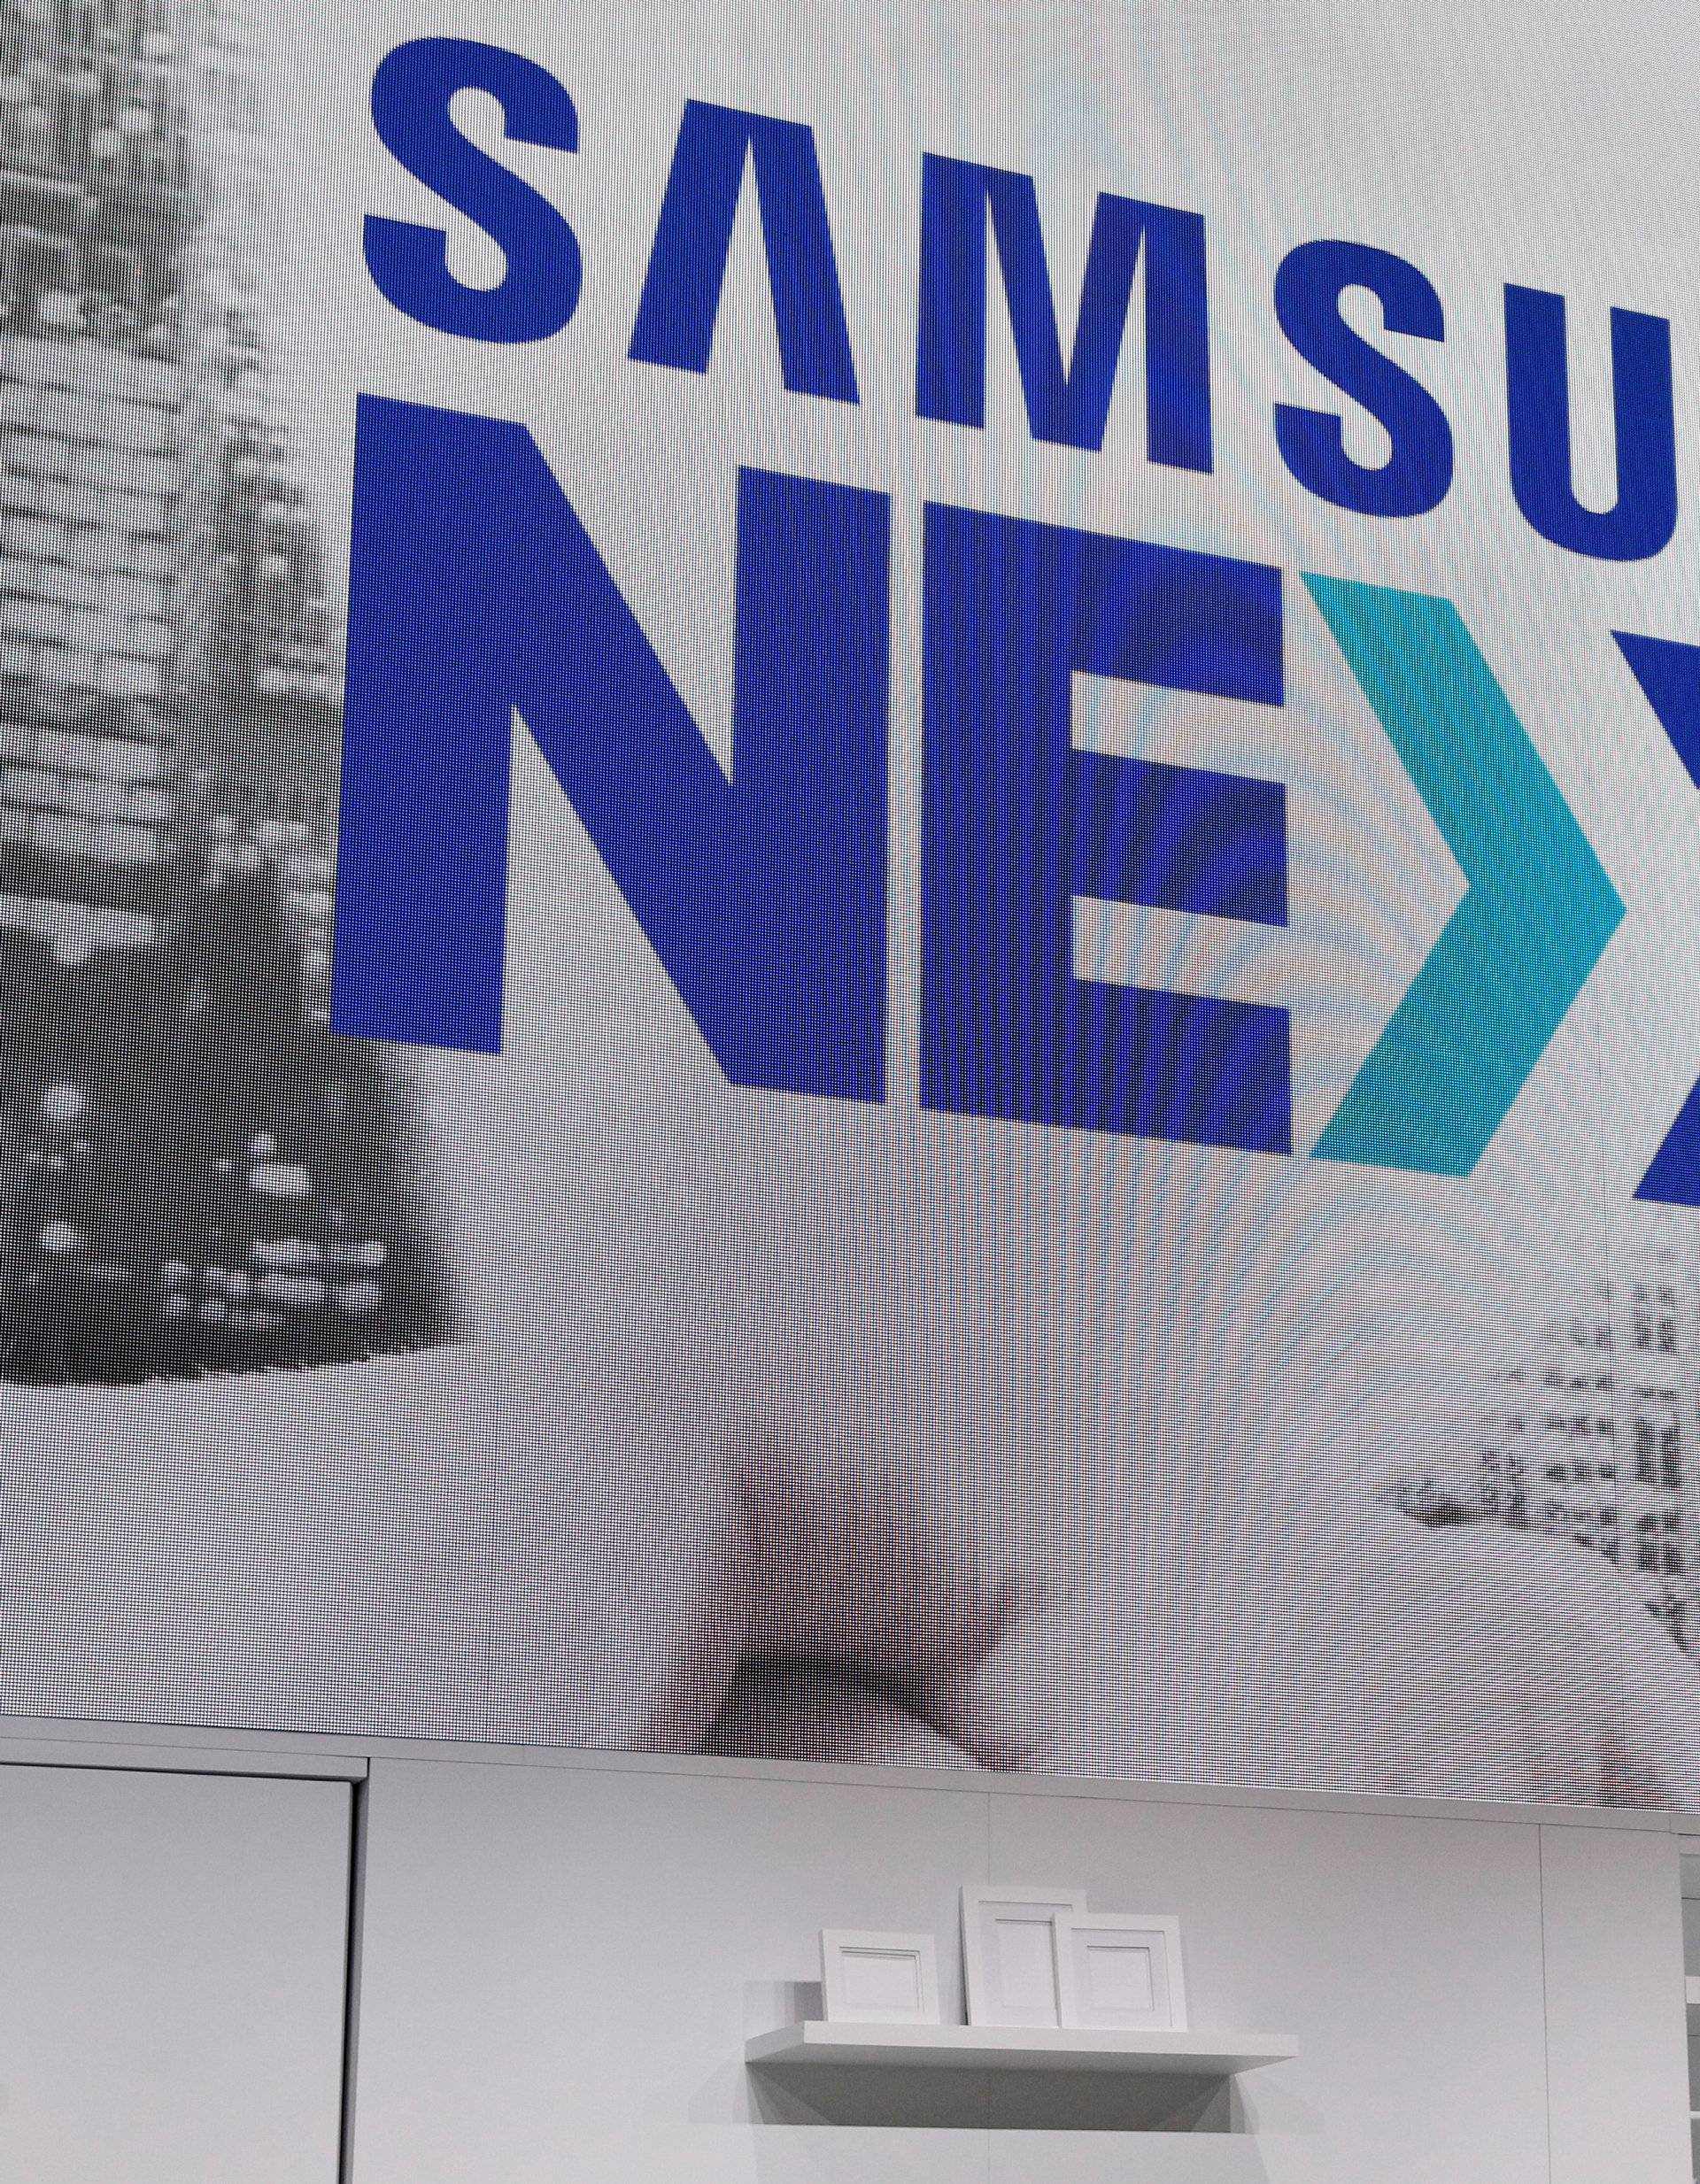 Tim Baxter, president and COO of Samsung Electronics America, talks about Samsung NEXT during a Samsung Electronics news conference at the 2017 CES in Las Vegas